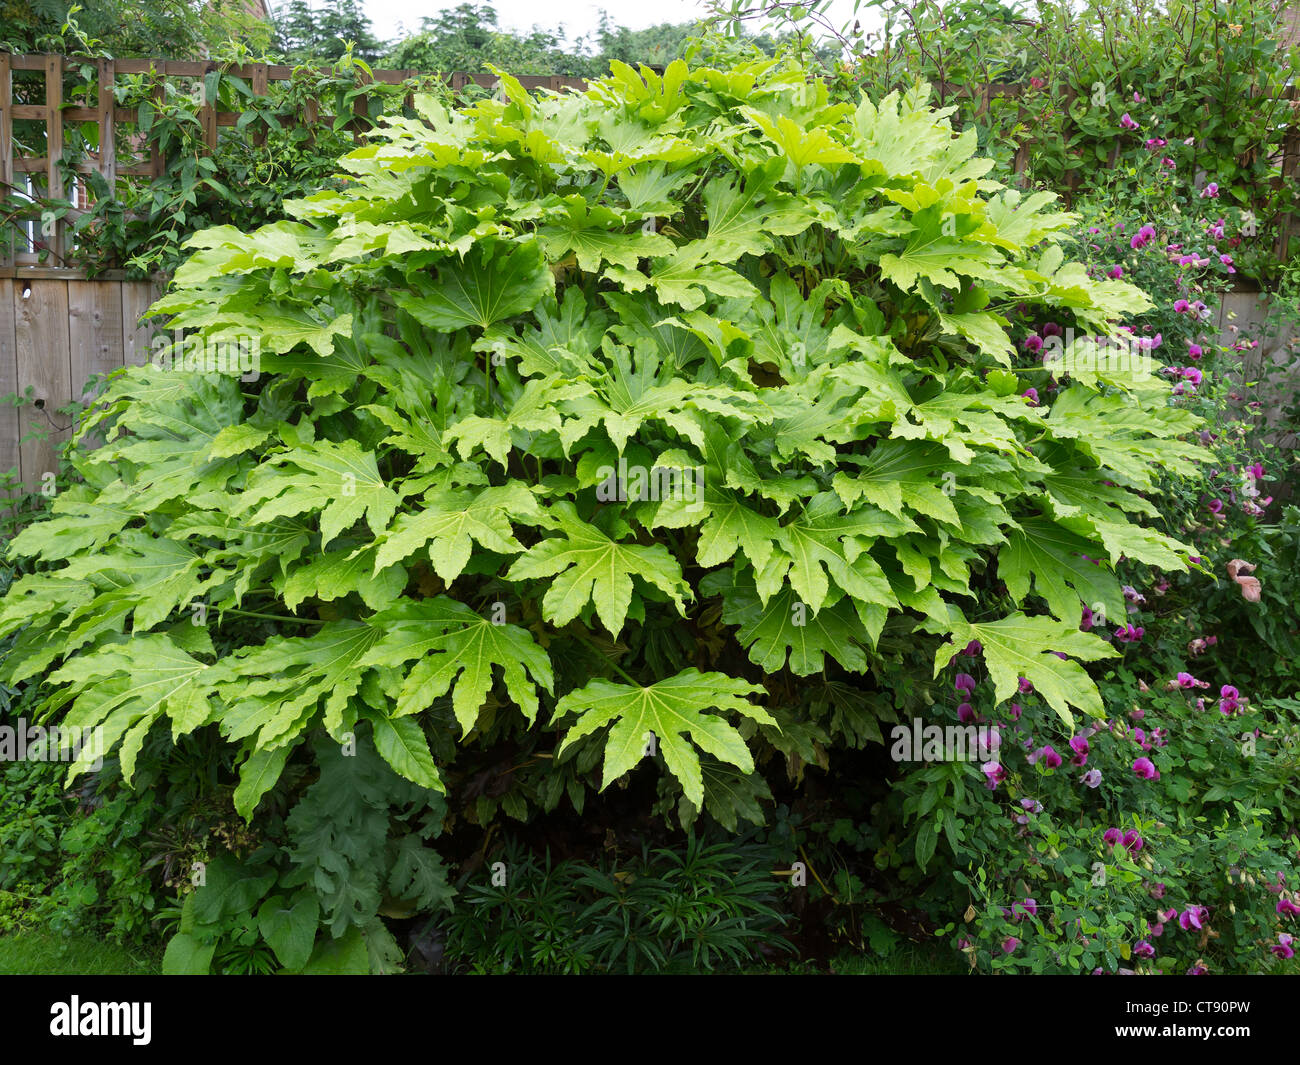 Fatsia japonica (Fatsi) or Japanese Aralia japonica grown very large in England in wet spring summer 2012 Stock Photo